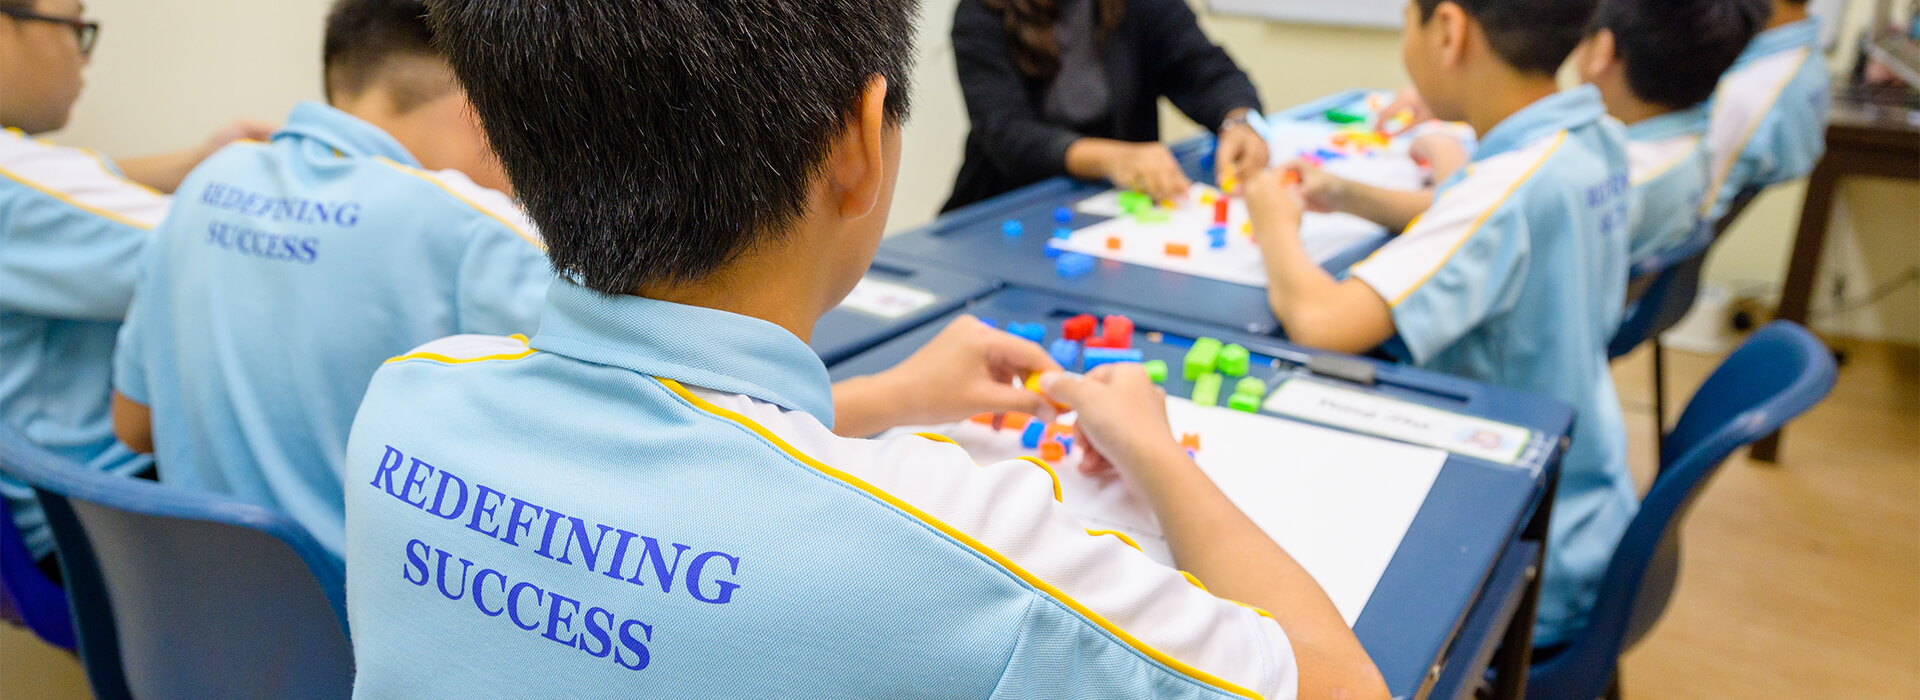 Inclusive Learning and Preschool Education at IIS Singapore